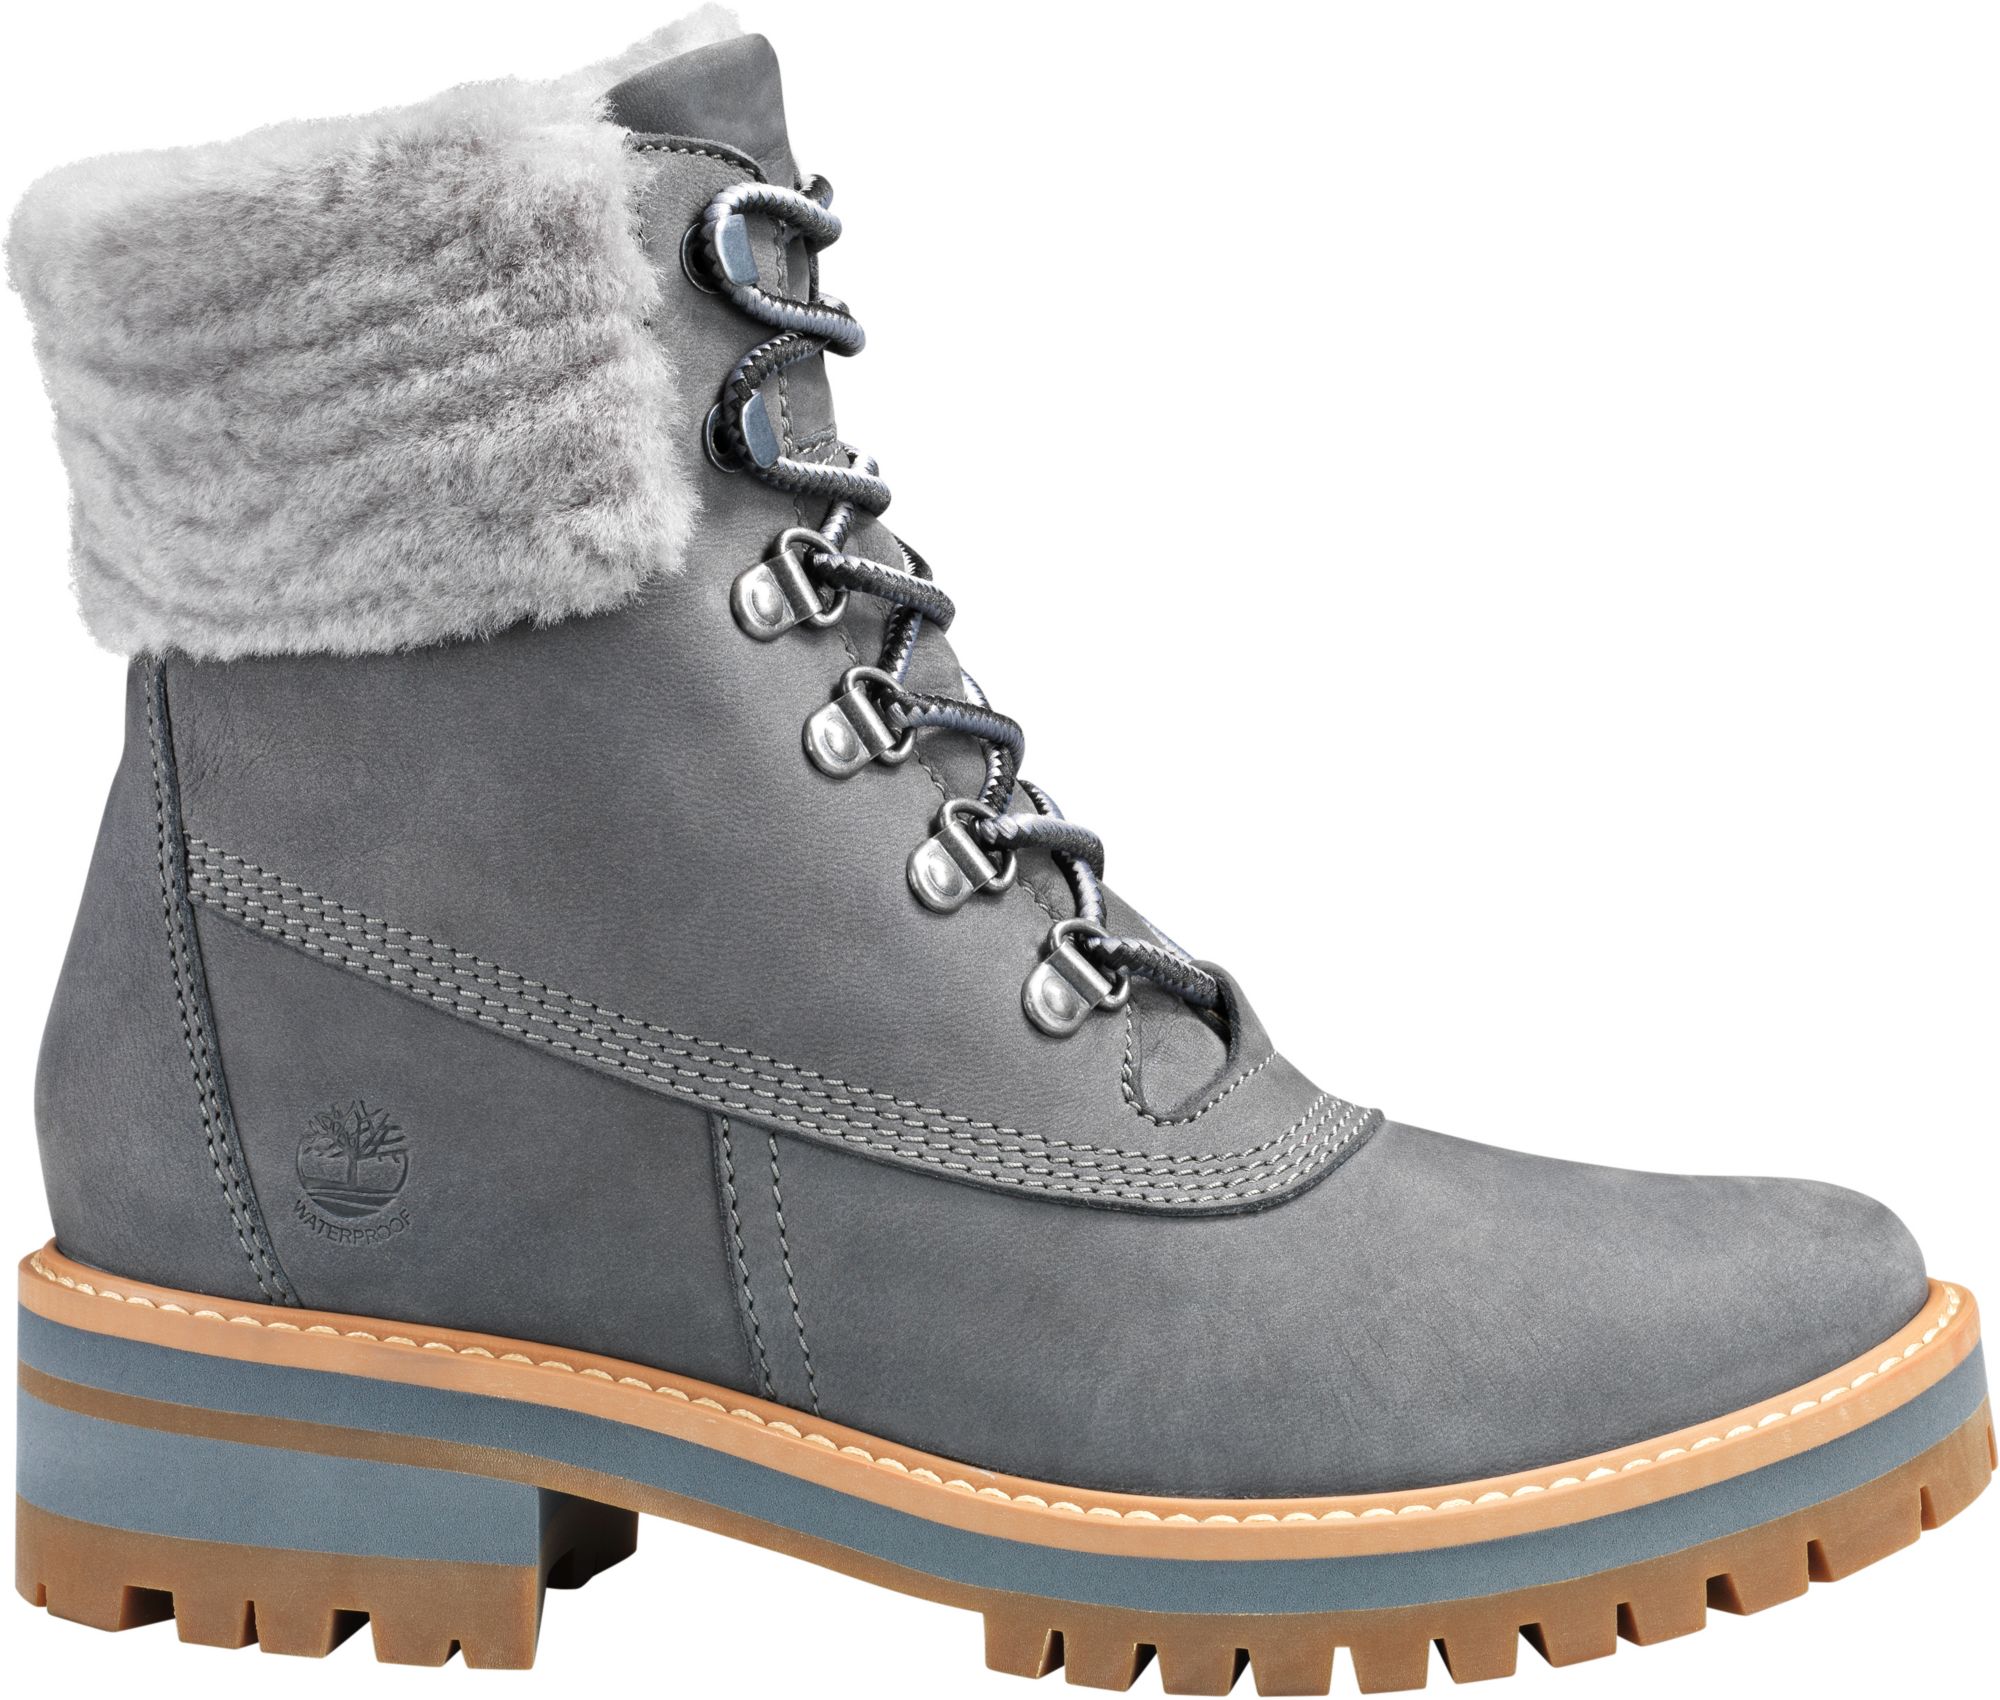 woman's winter boots